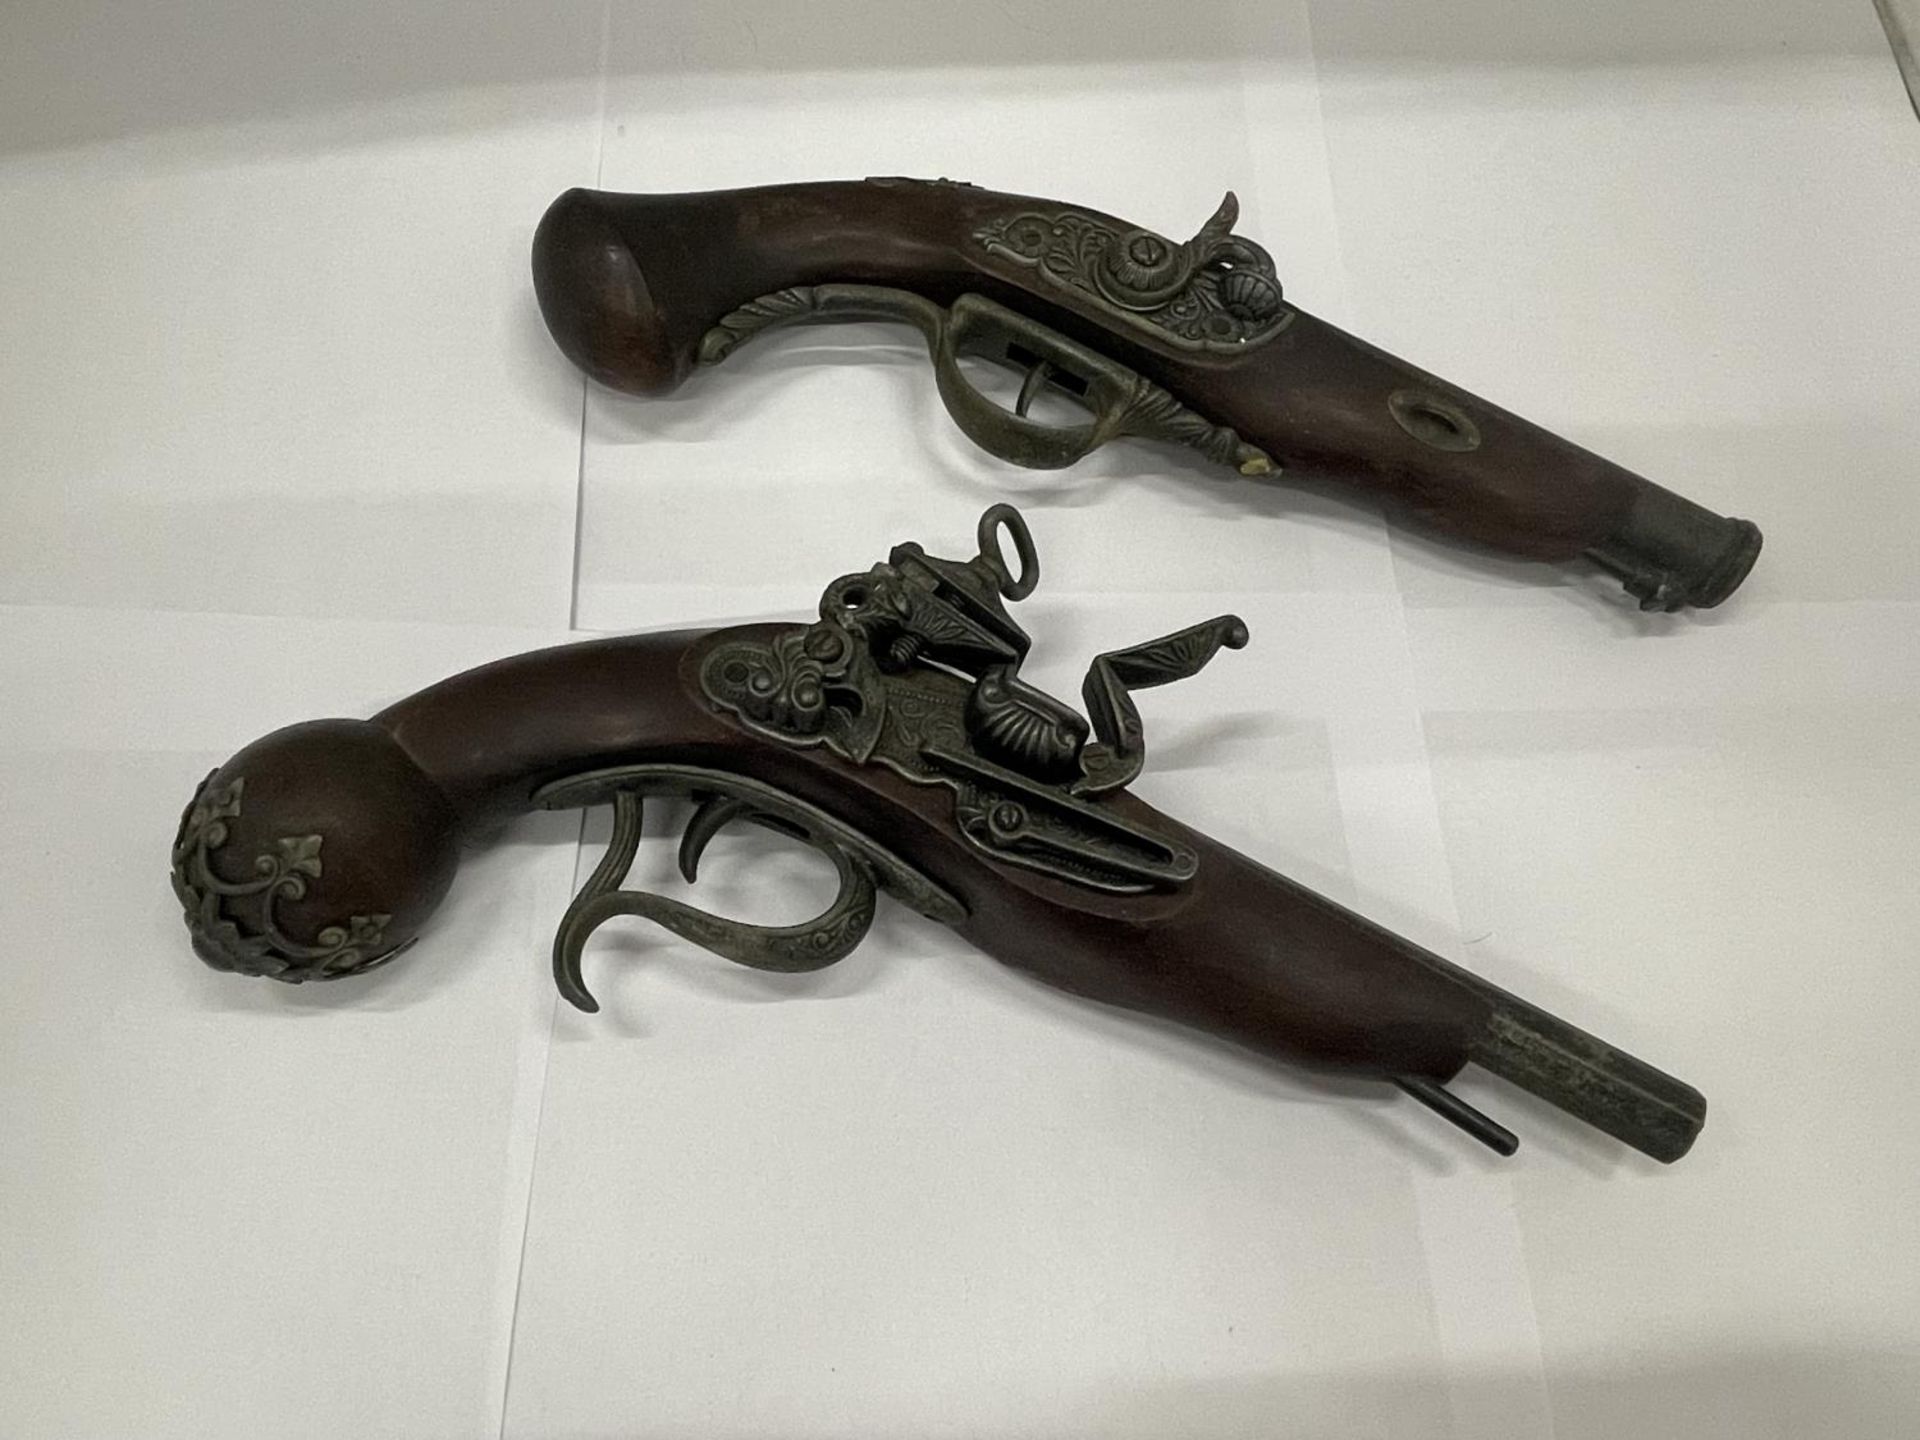 A PAIR OF DECORATIVE 'DUELING' PISTOLS - Image 2 of 2